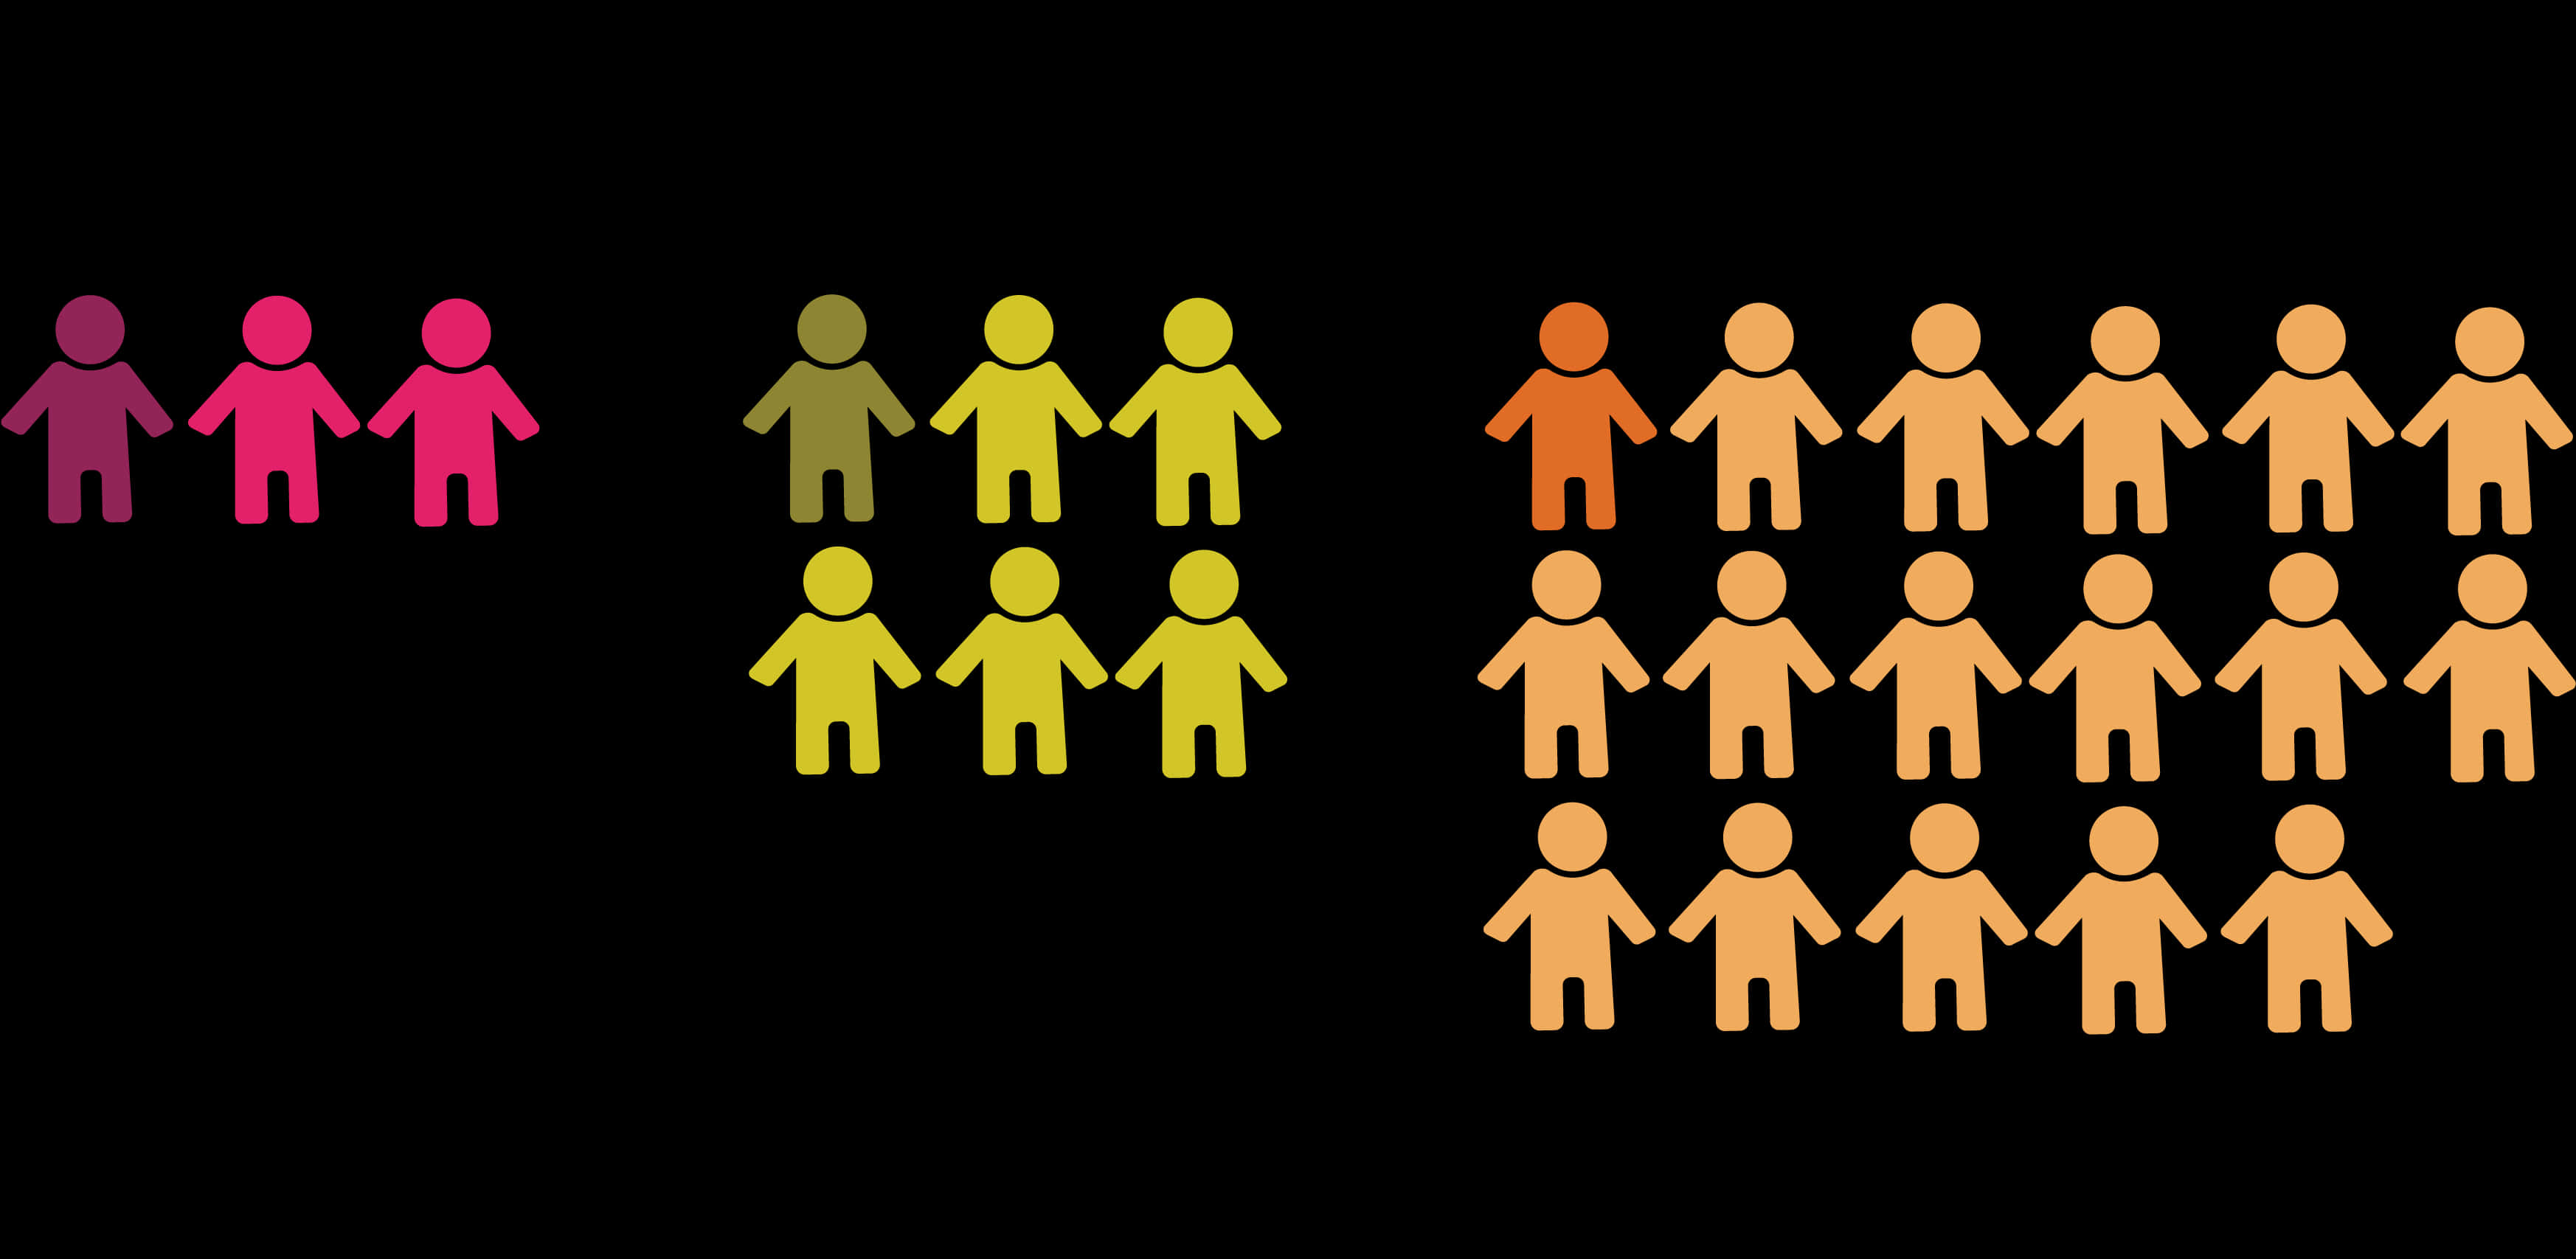 A Group Of People With Different Colors